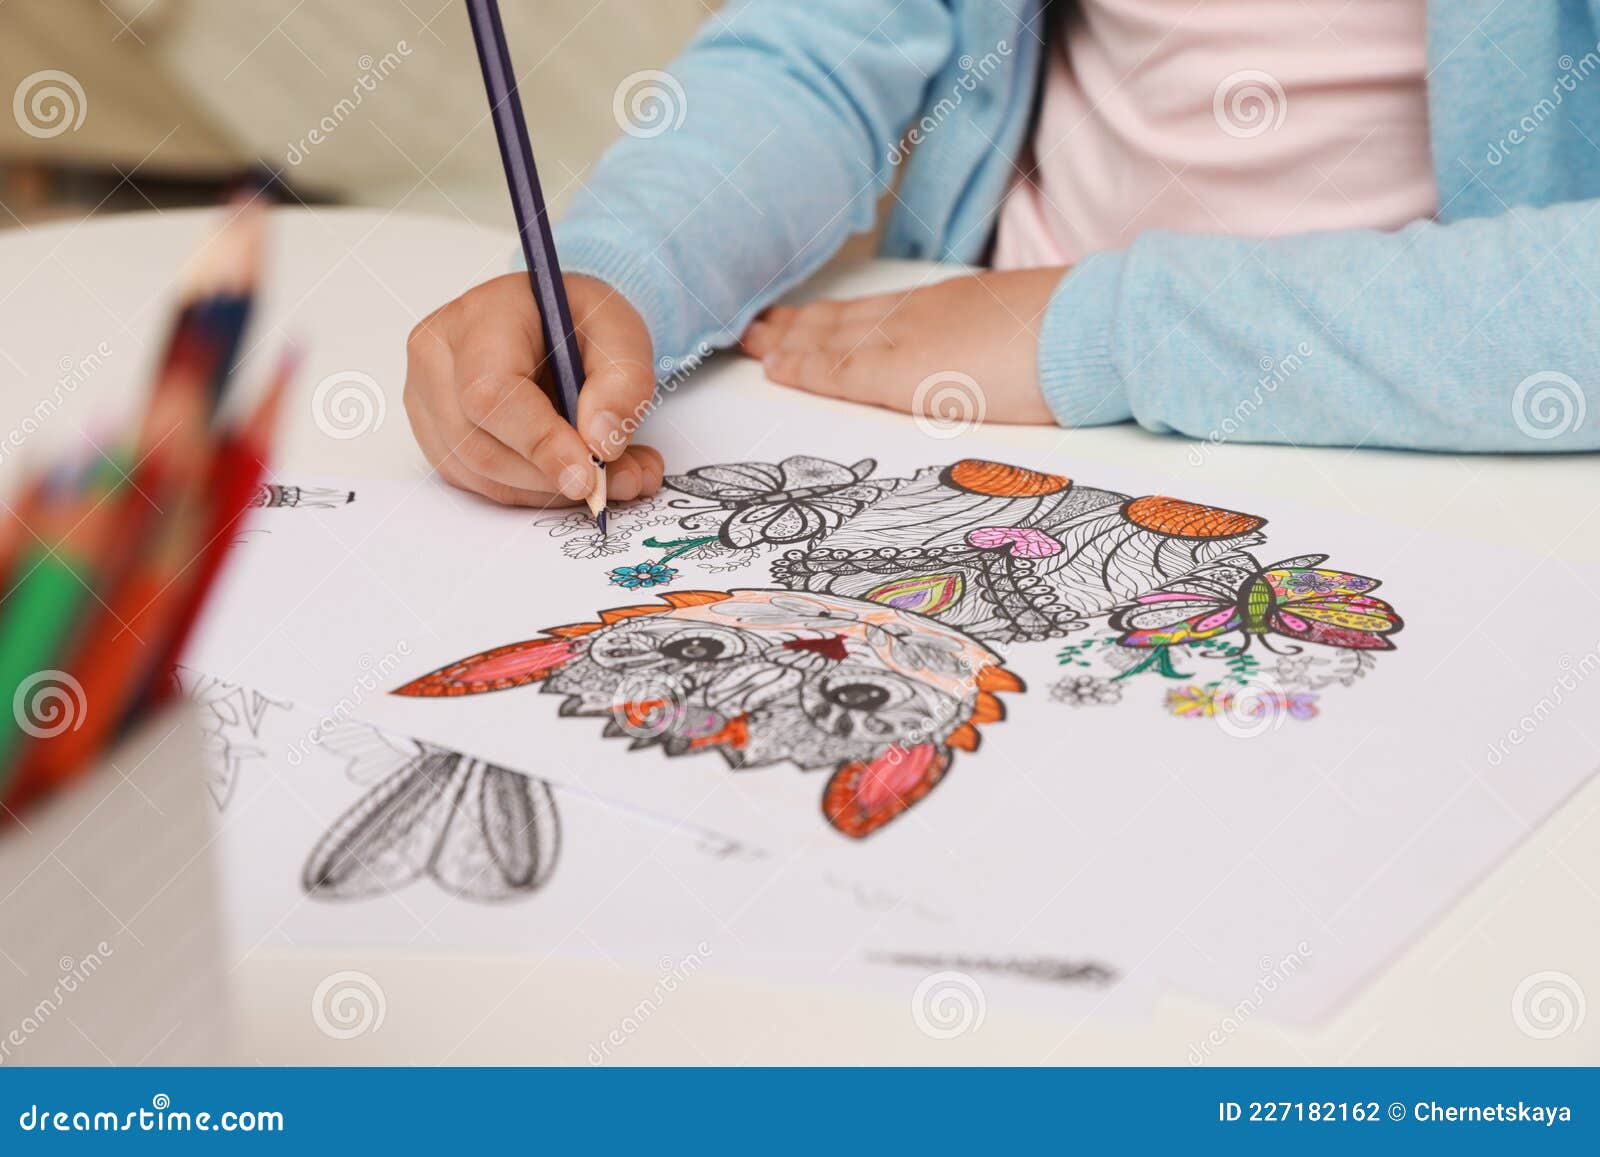 https://thumbs.dreamstime.com/z/little-girl-coloring-antistress-page-table-closeup-little-girl-coloring-antistress-page-table-closeup-227182162.jpg